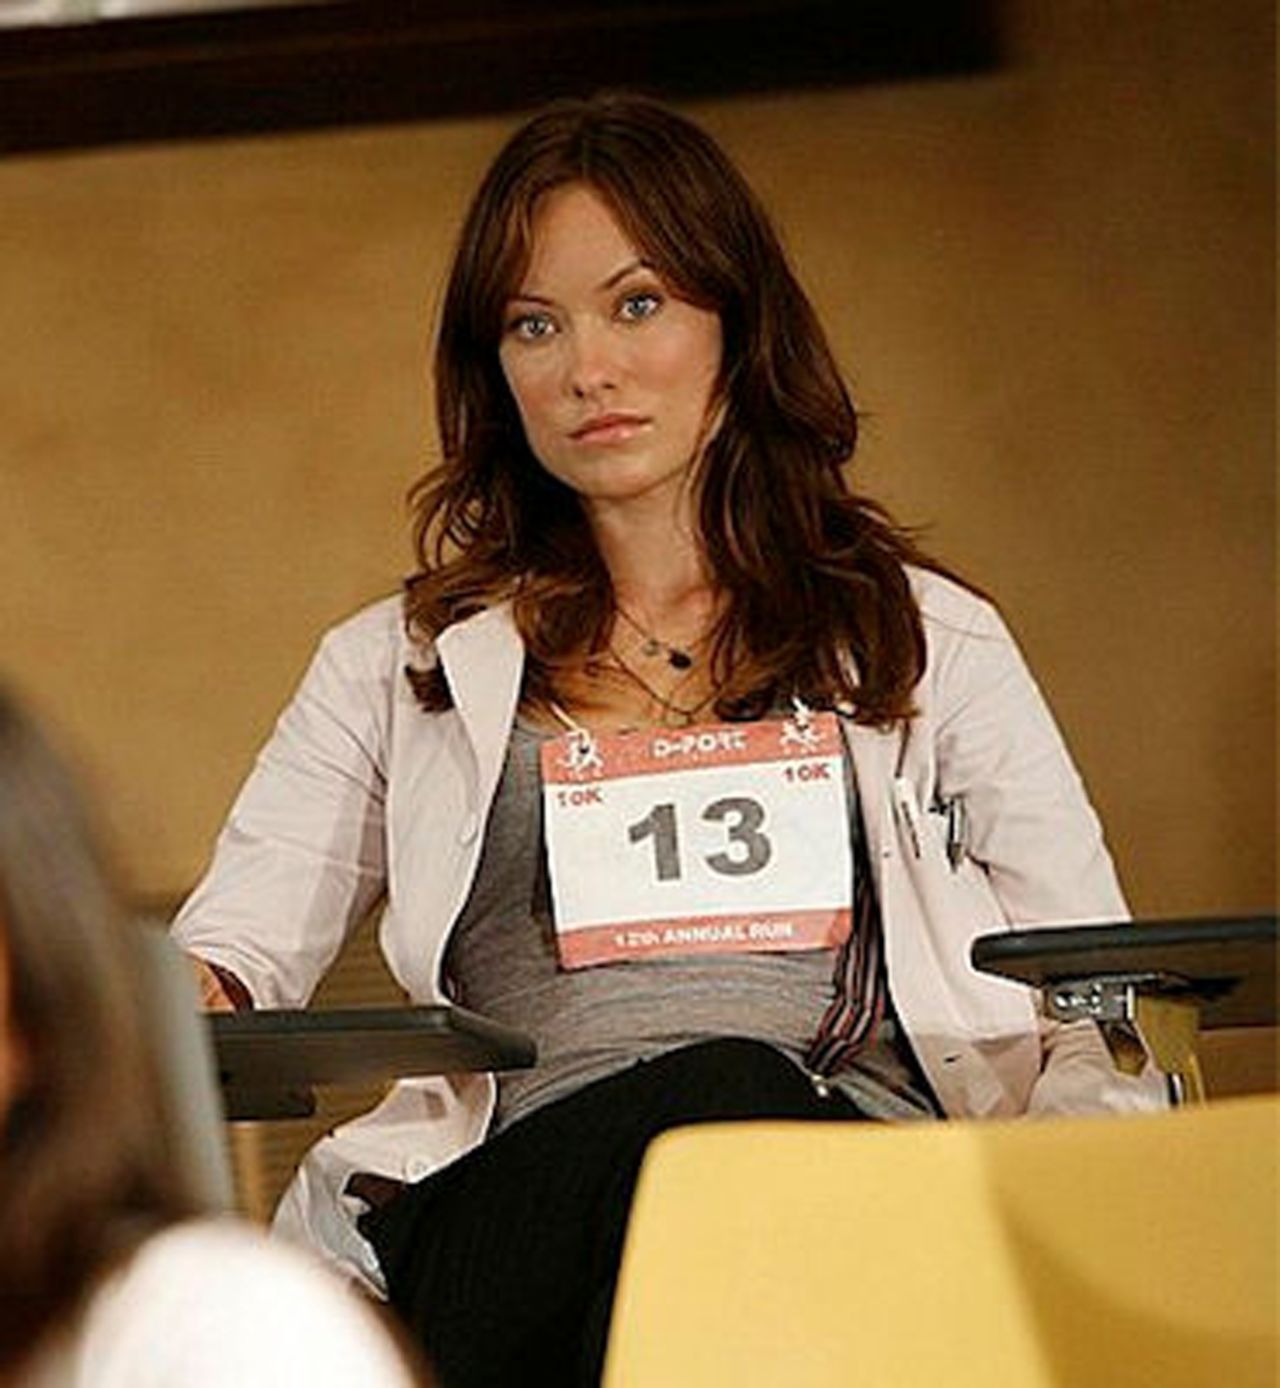 After playing bisexual Alex Kelly on "The O.C.," Olivia Wilde played Dr. Remy "Thirteen" Hadley on Fox's "House."